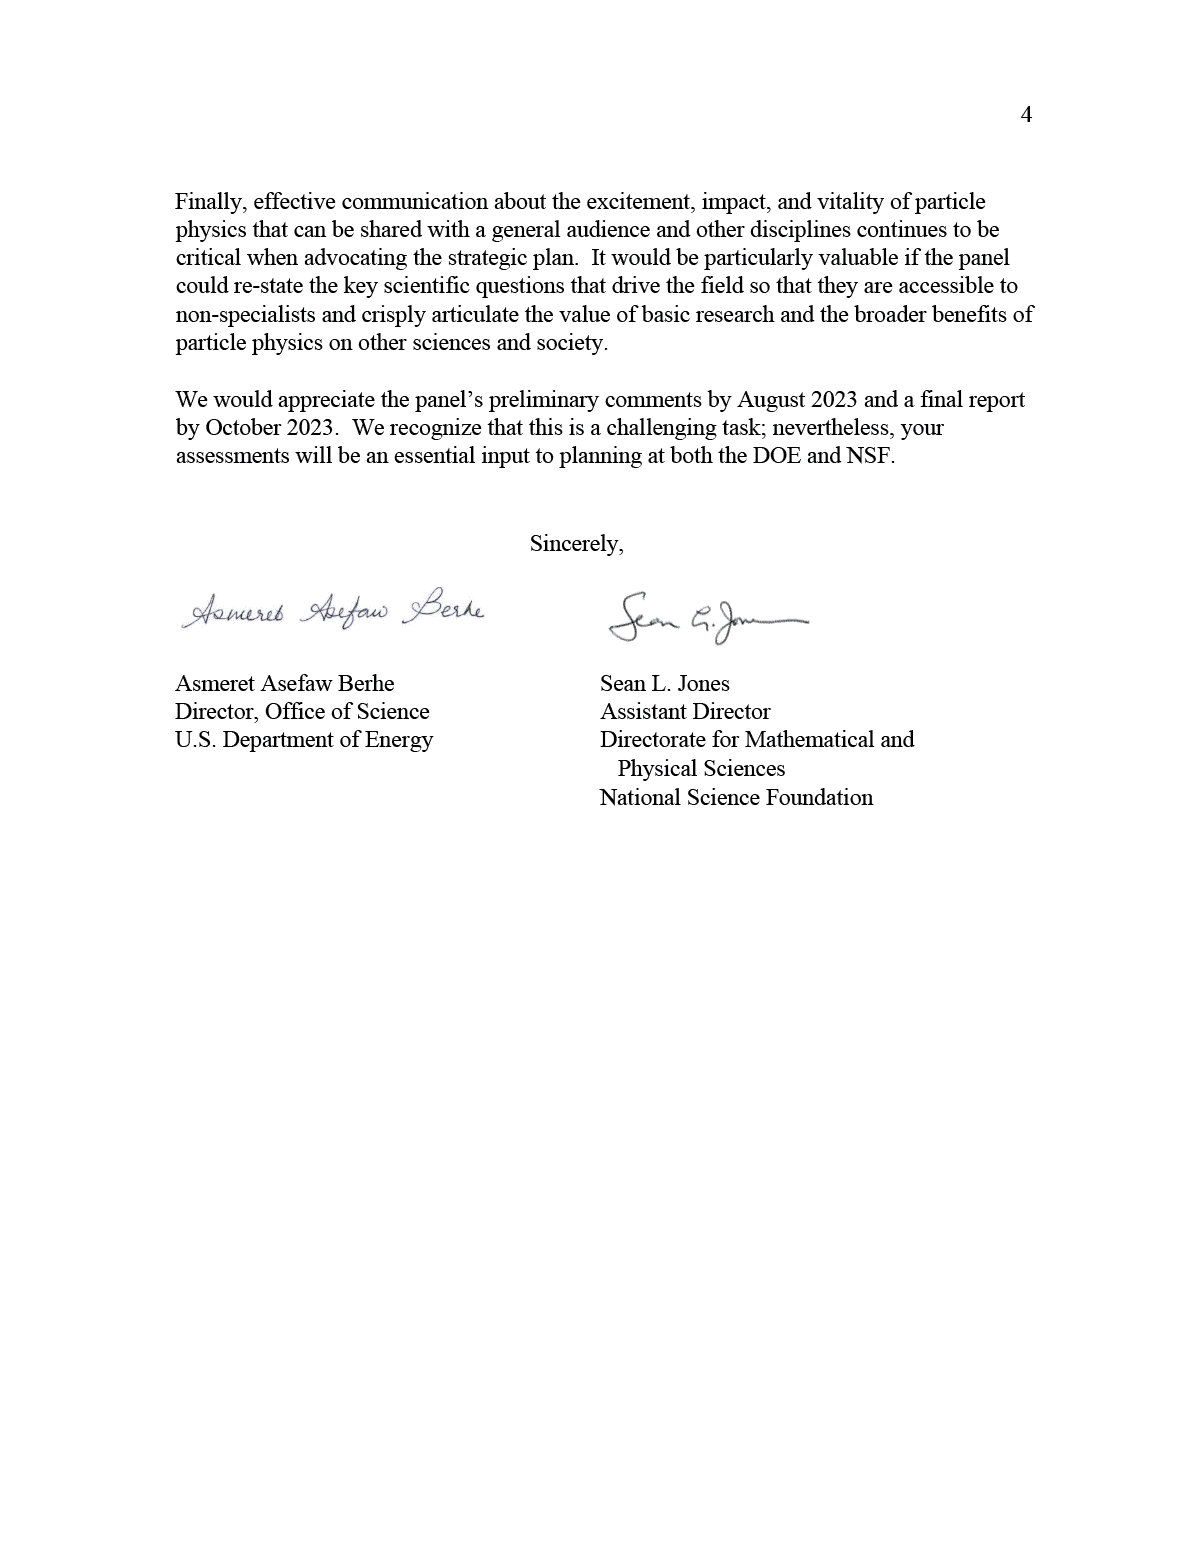 page four of the charge to p5 letter